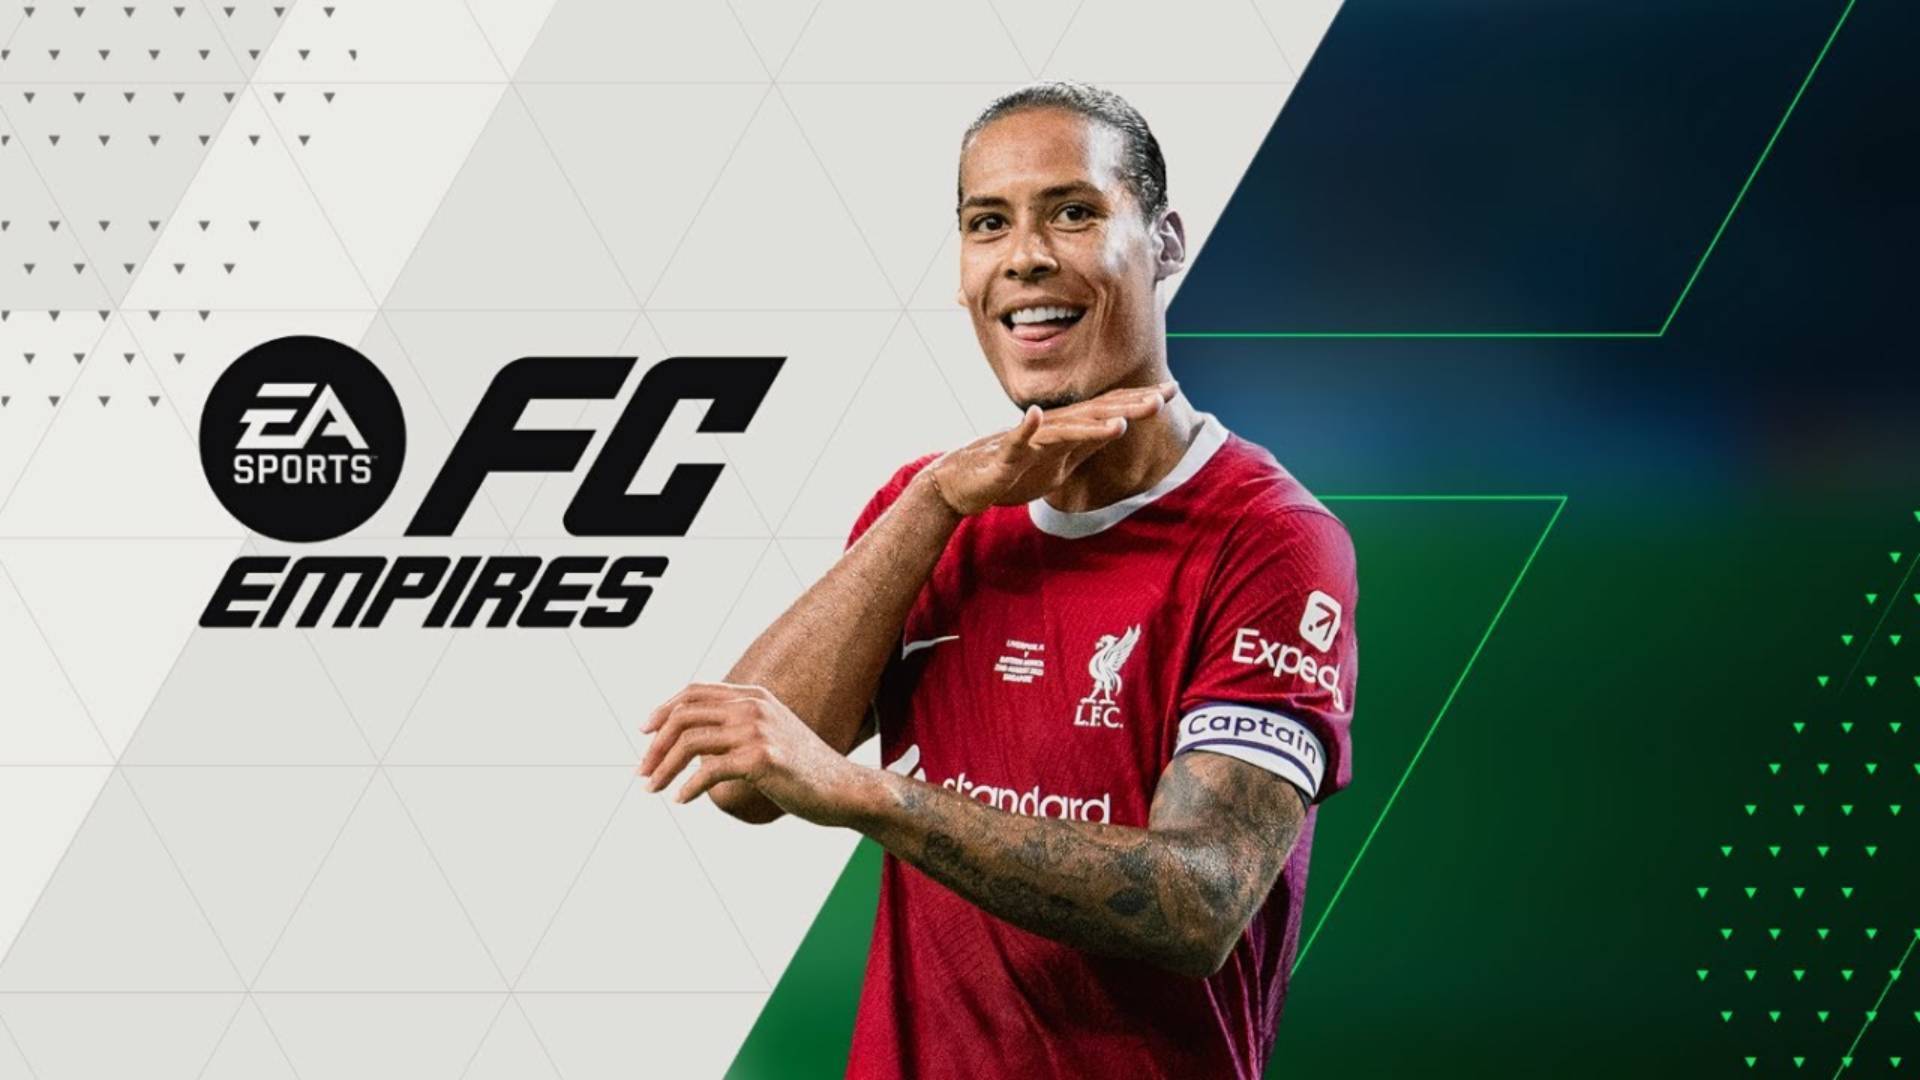 Banner of EA SPORTS FC™ エンパイア 0.1.0